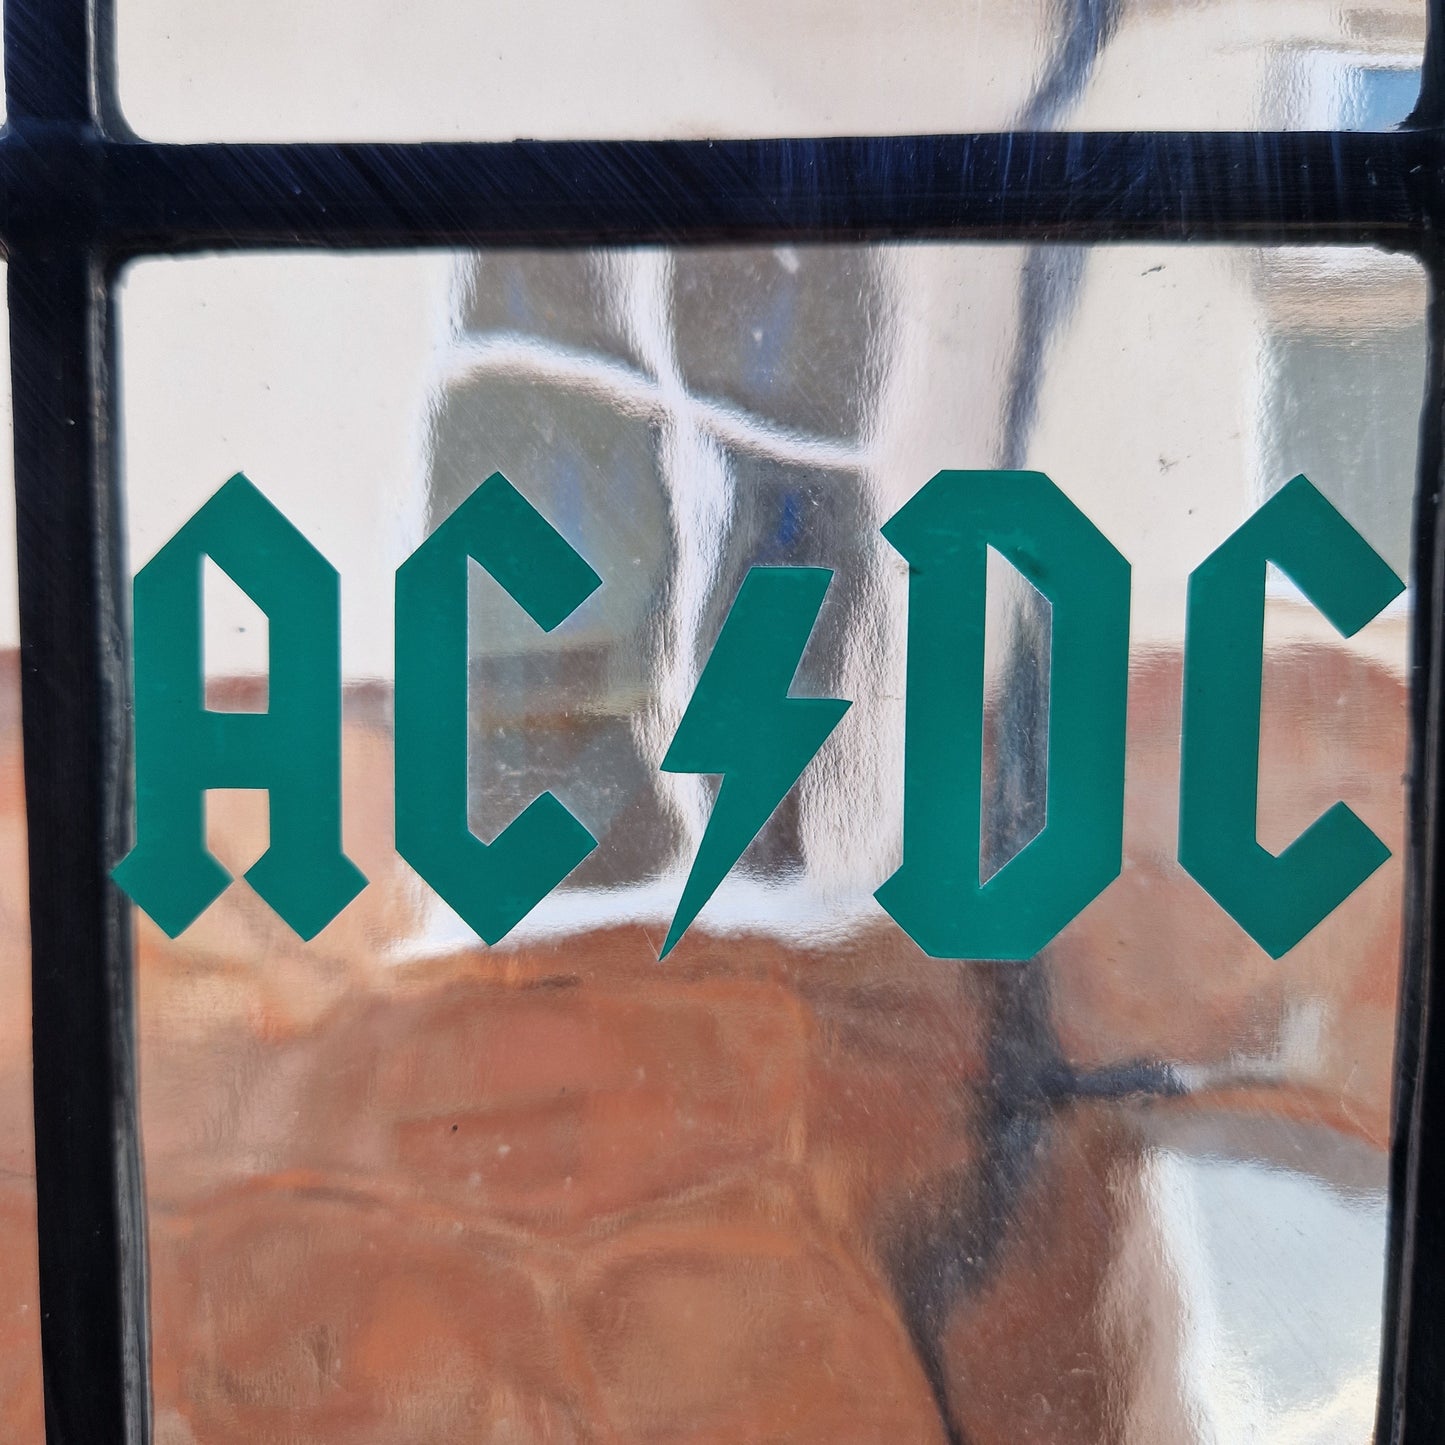 acdc sticker music decal on textured glass